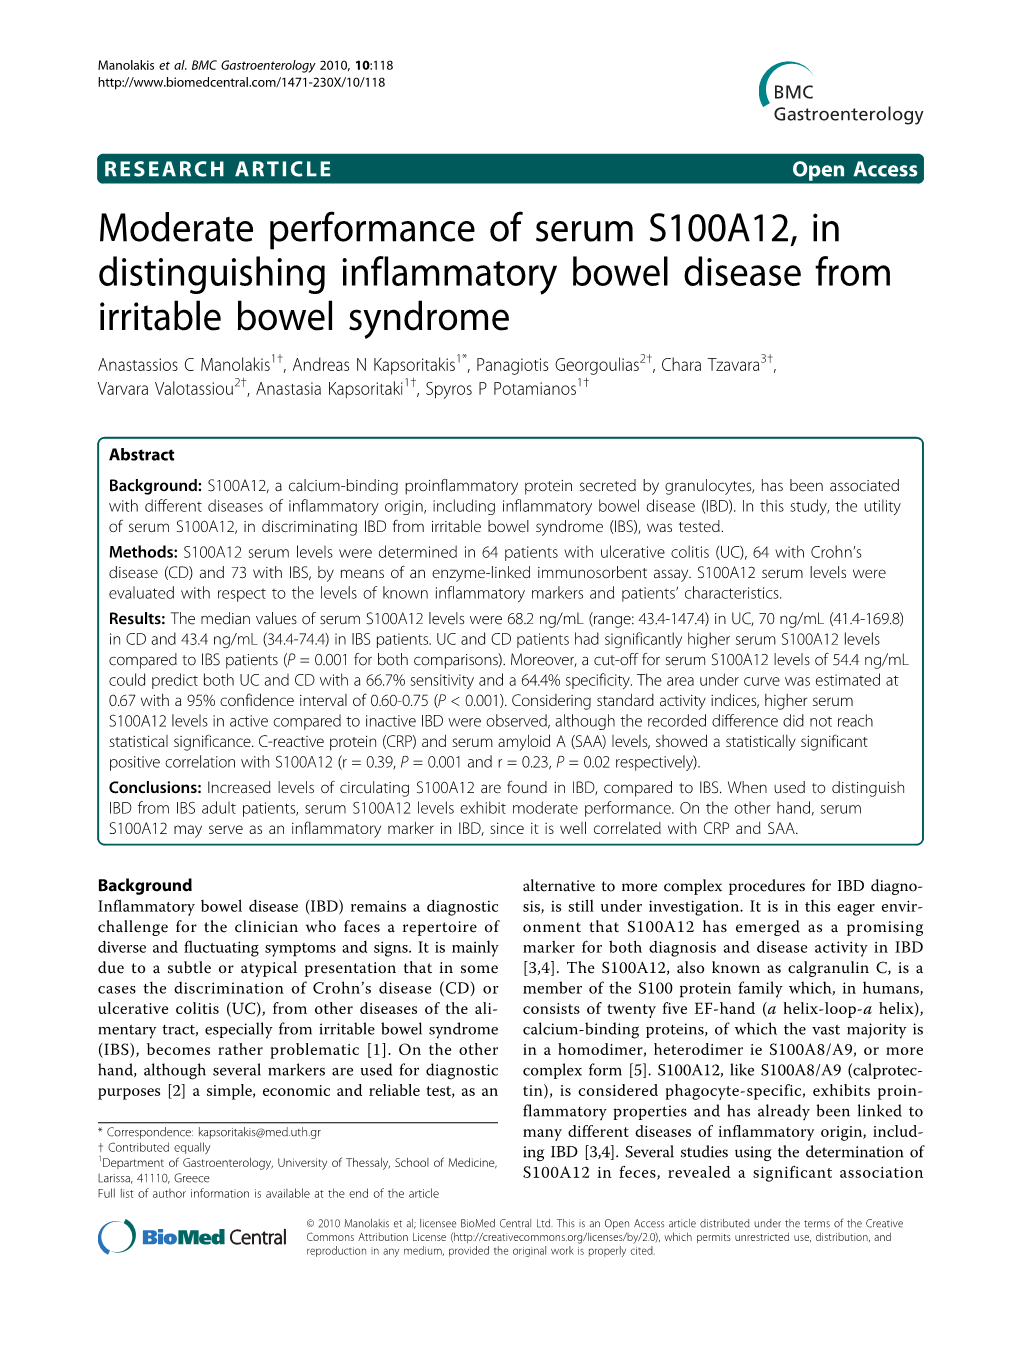 Moderate Performance of Serum S100A12, in Distinguishing